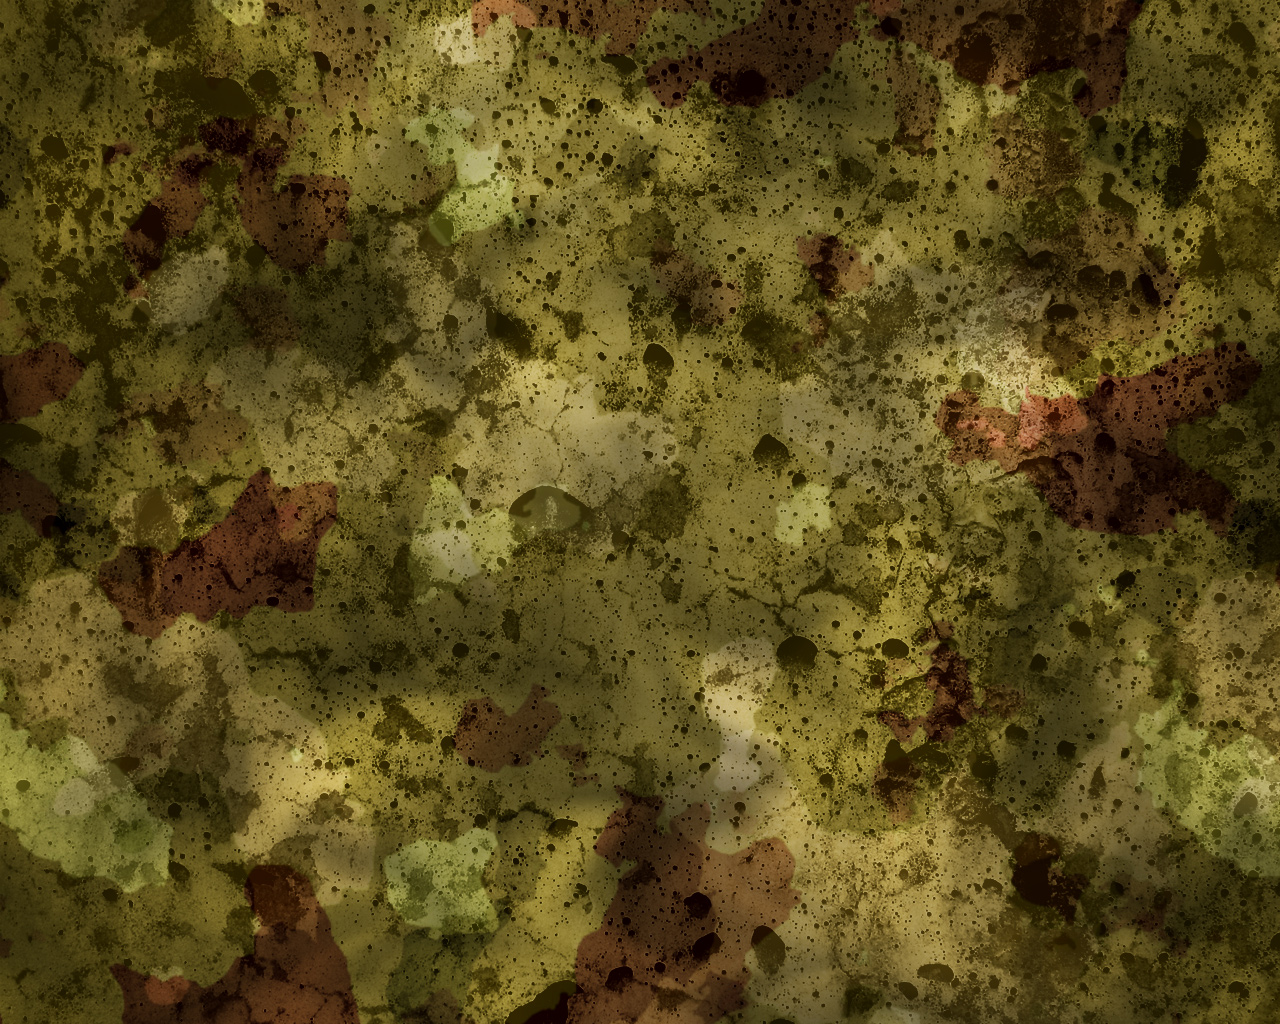  camouflage wallpaper border 6 results like the camouflage border green 1280x1024